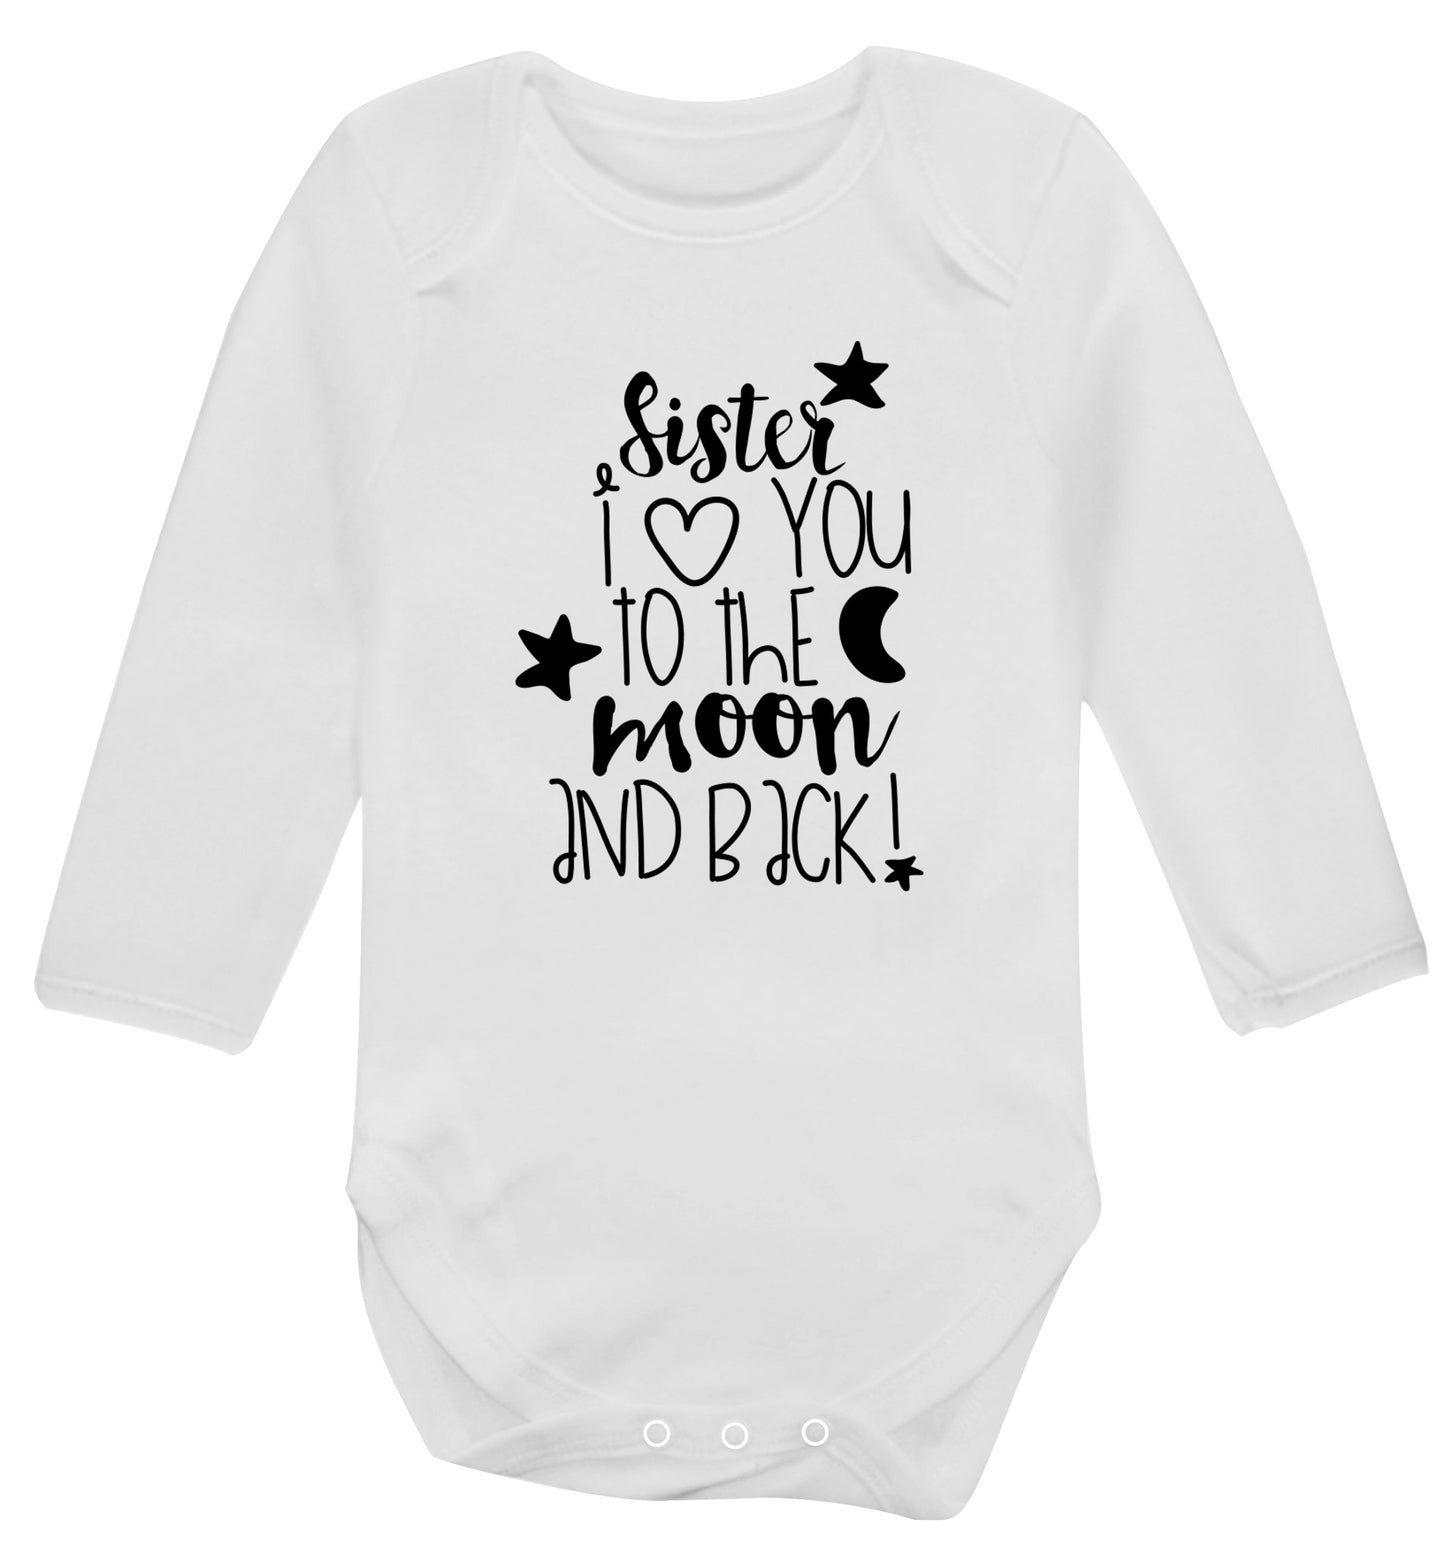 Sister I love you to the moon and back Baby Vest long sleeved white 6-12 months